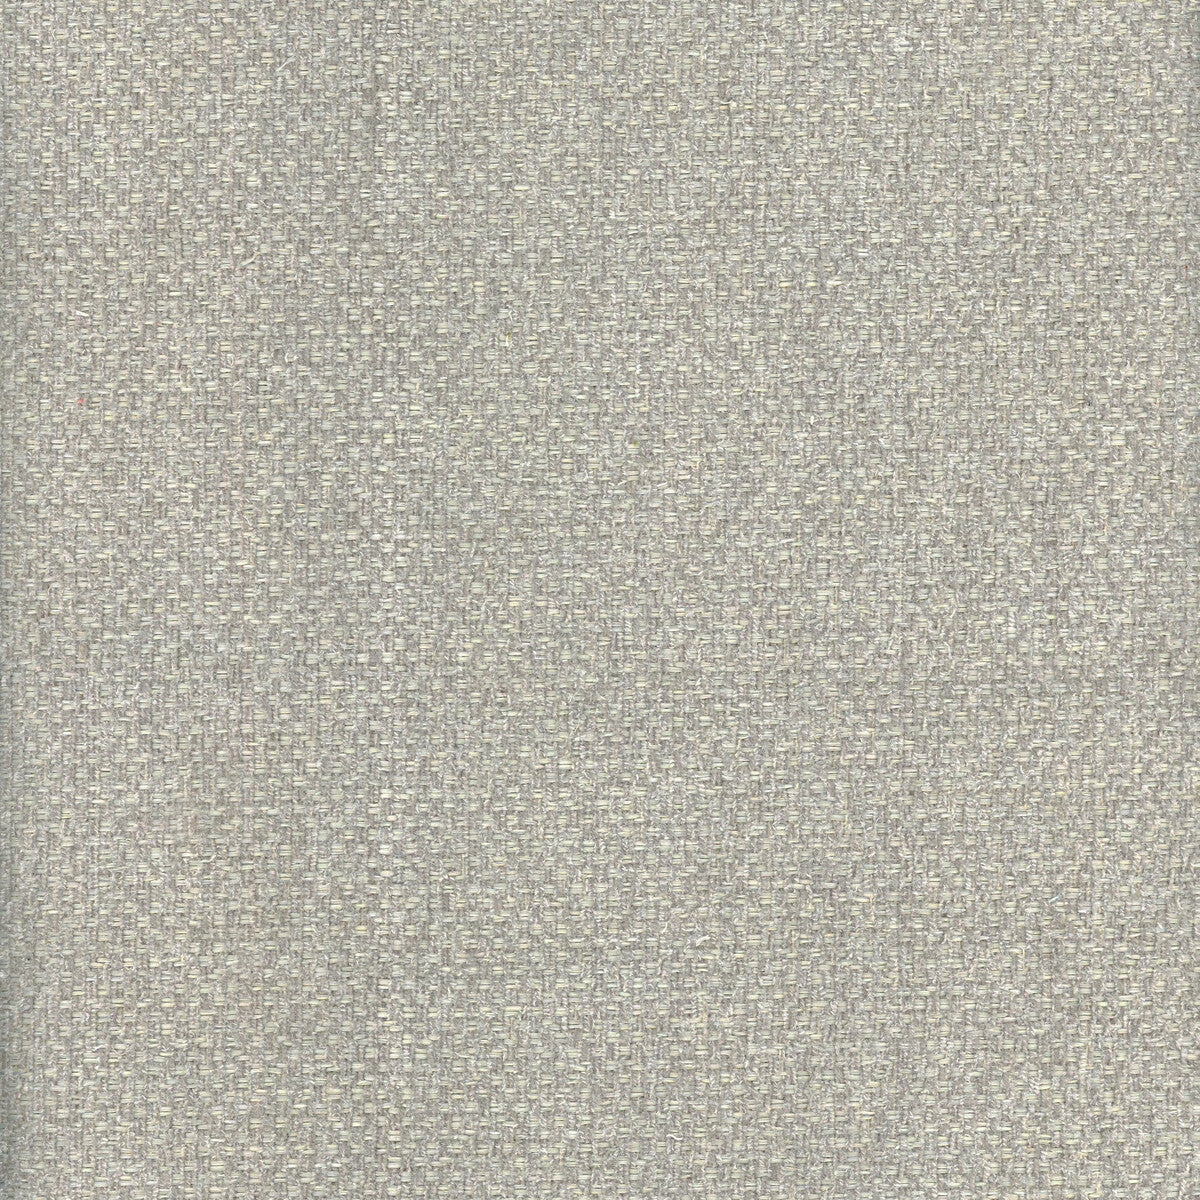 Yosemite fabric in pebble color - pattern AM100332.11.0 - by Kravet Couture in the Andrew Martin Canyon collection